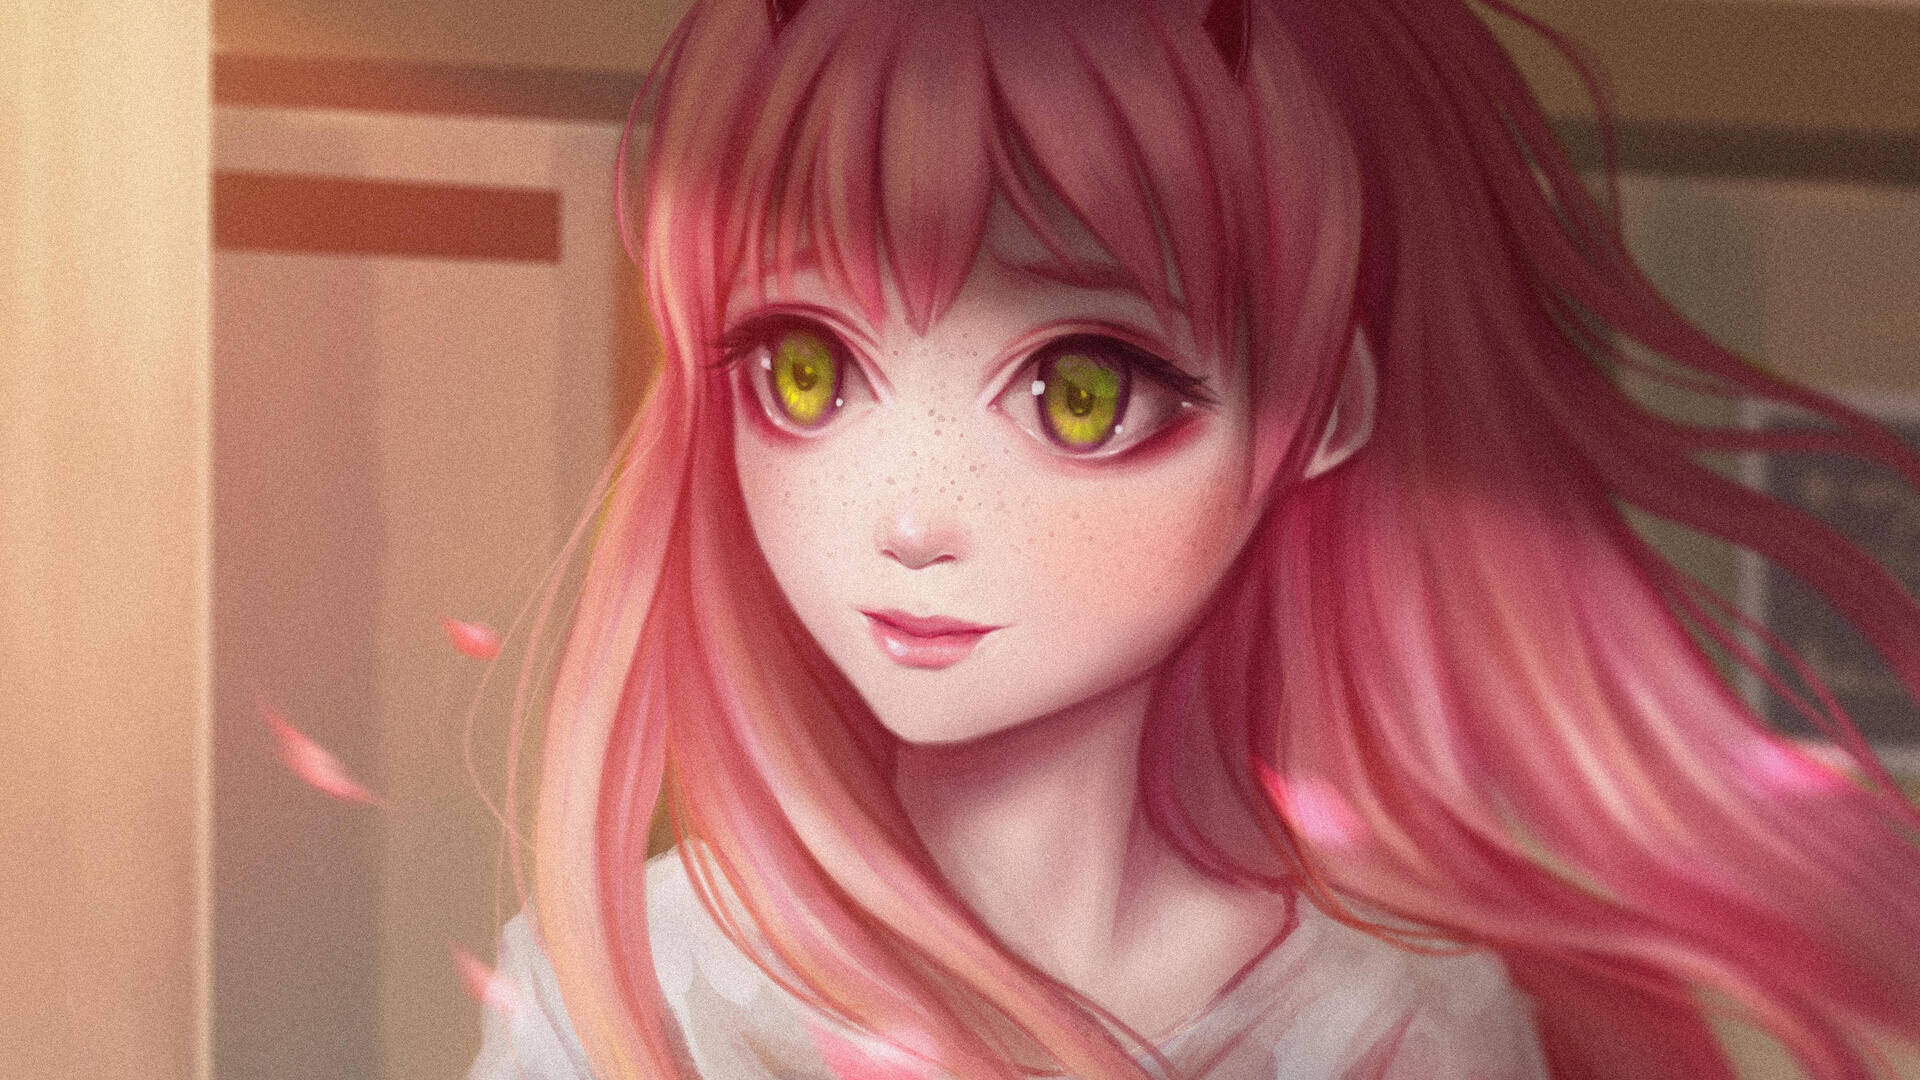 a girl with pink hair and green eyes Wallpaper